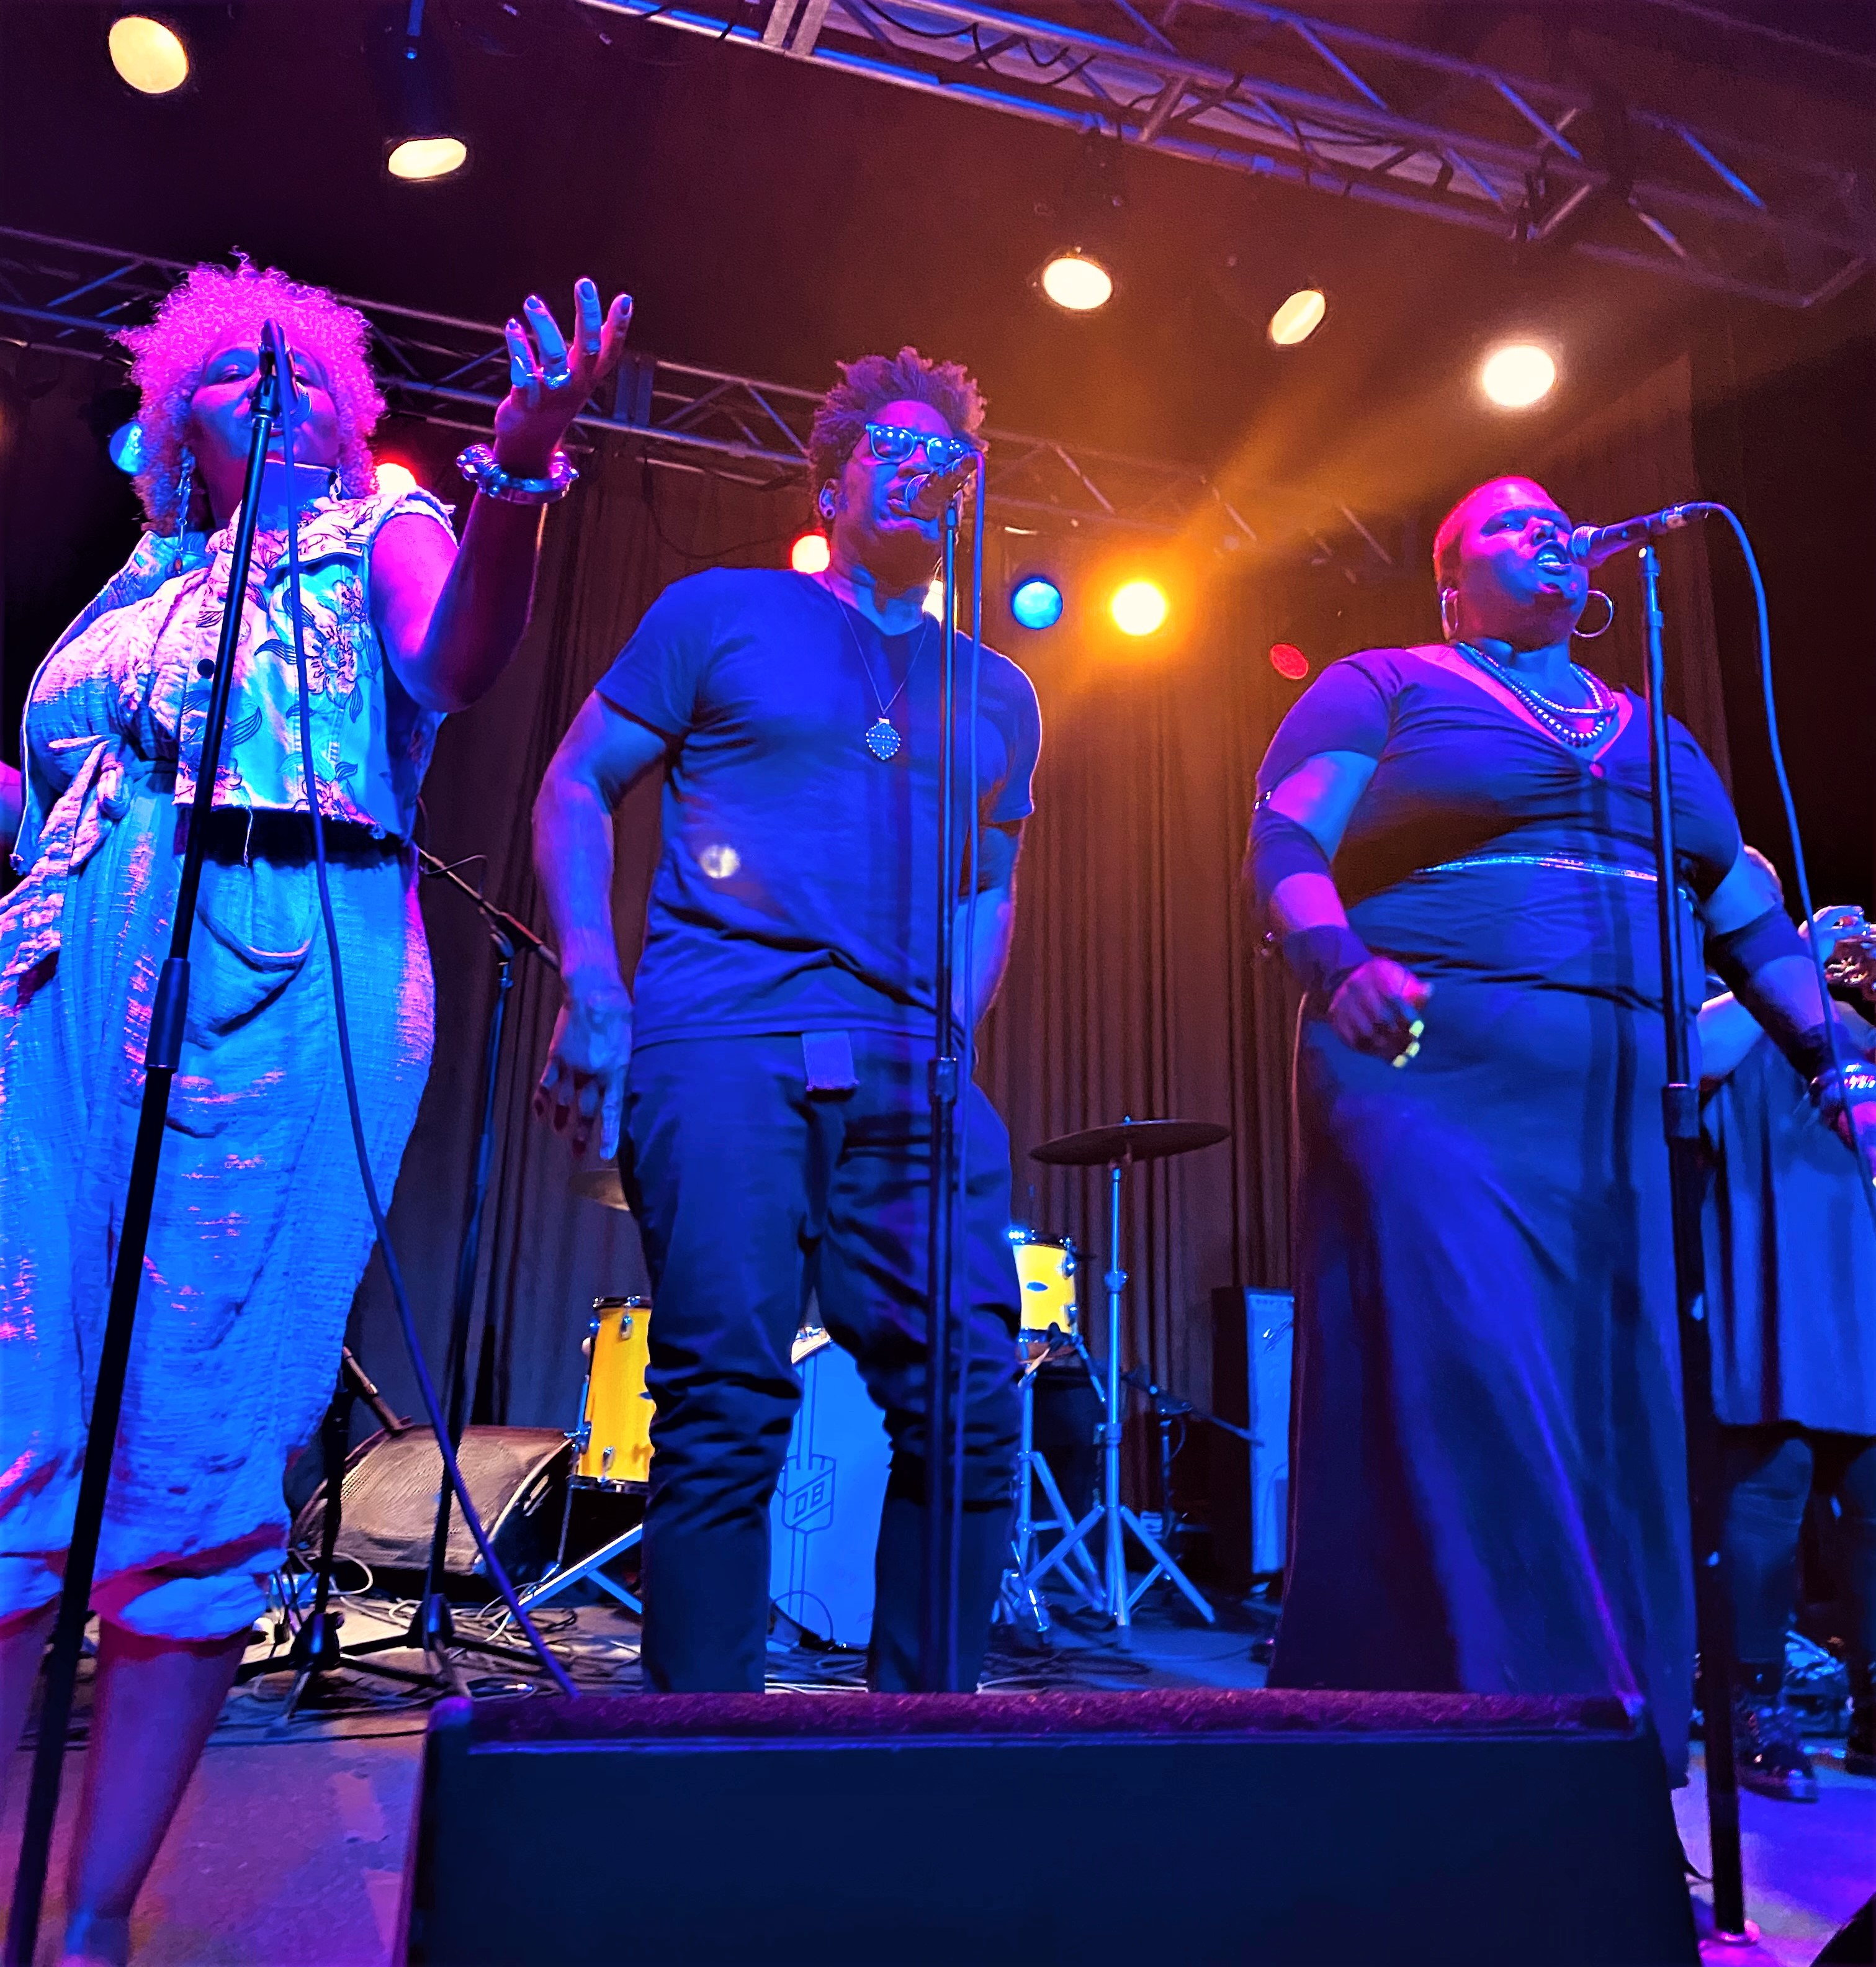 The musical ensemble based in Cleveland “with a multi-generational, gender and genre non-conforming amalgam of Black Culture” has been wowing audiences for years. 